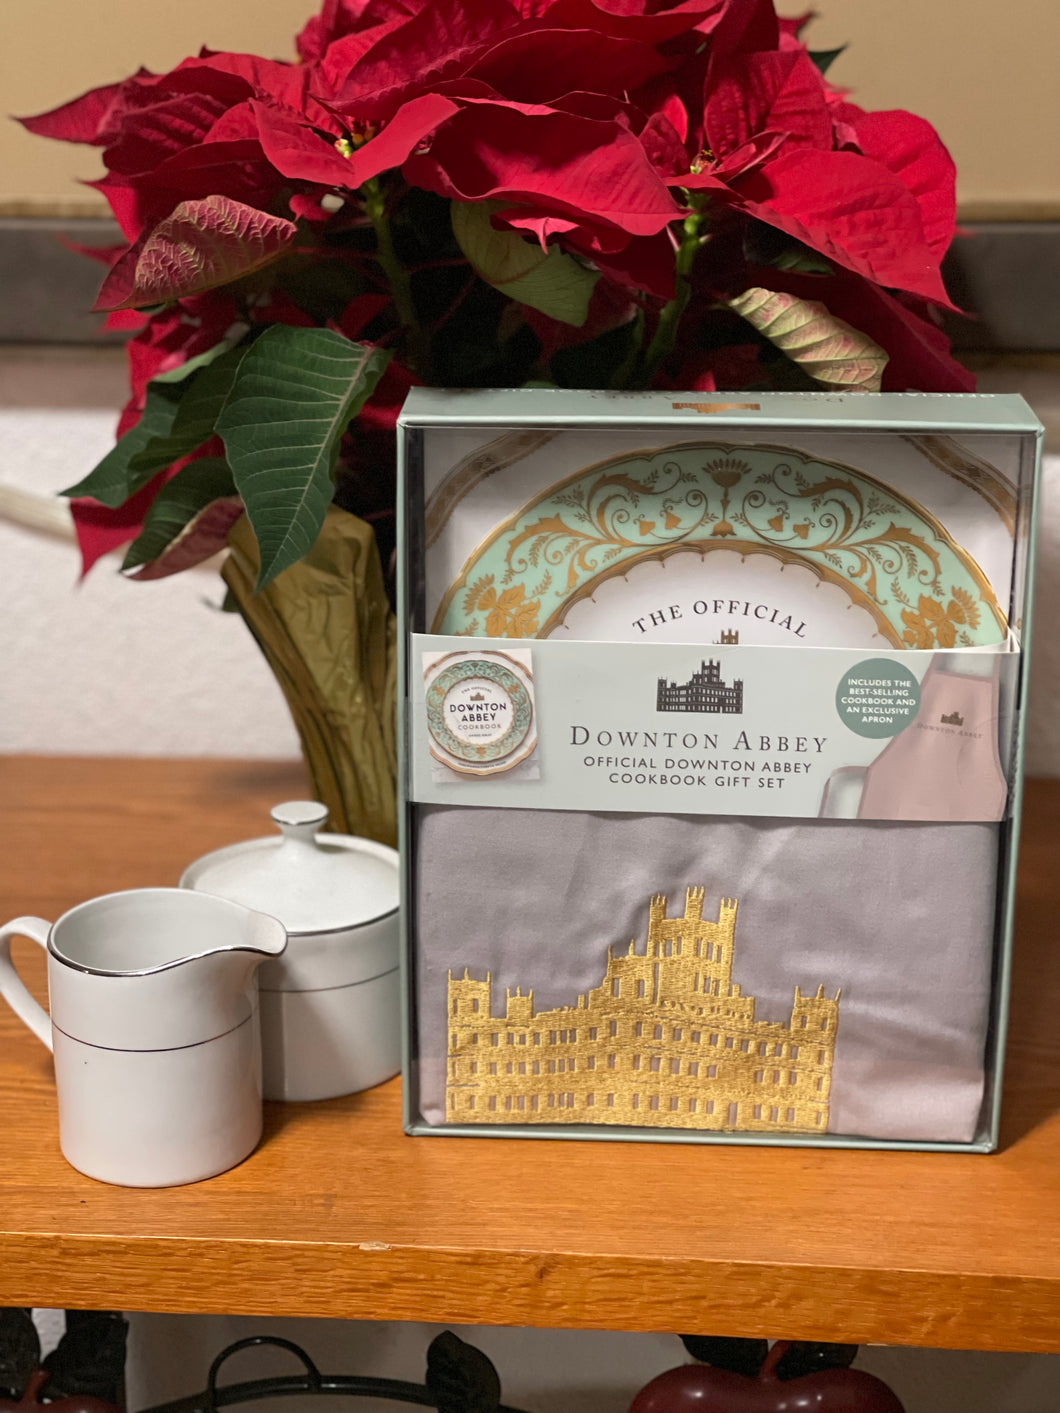 The Official Downton Abbey Cookbook and Apron Gift Set (Downton Abbey Cookery) by Annie Gray *Released 09.17.2019